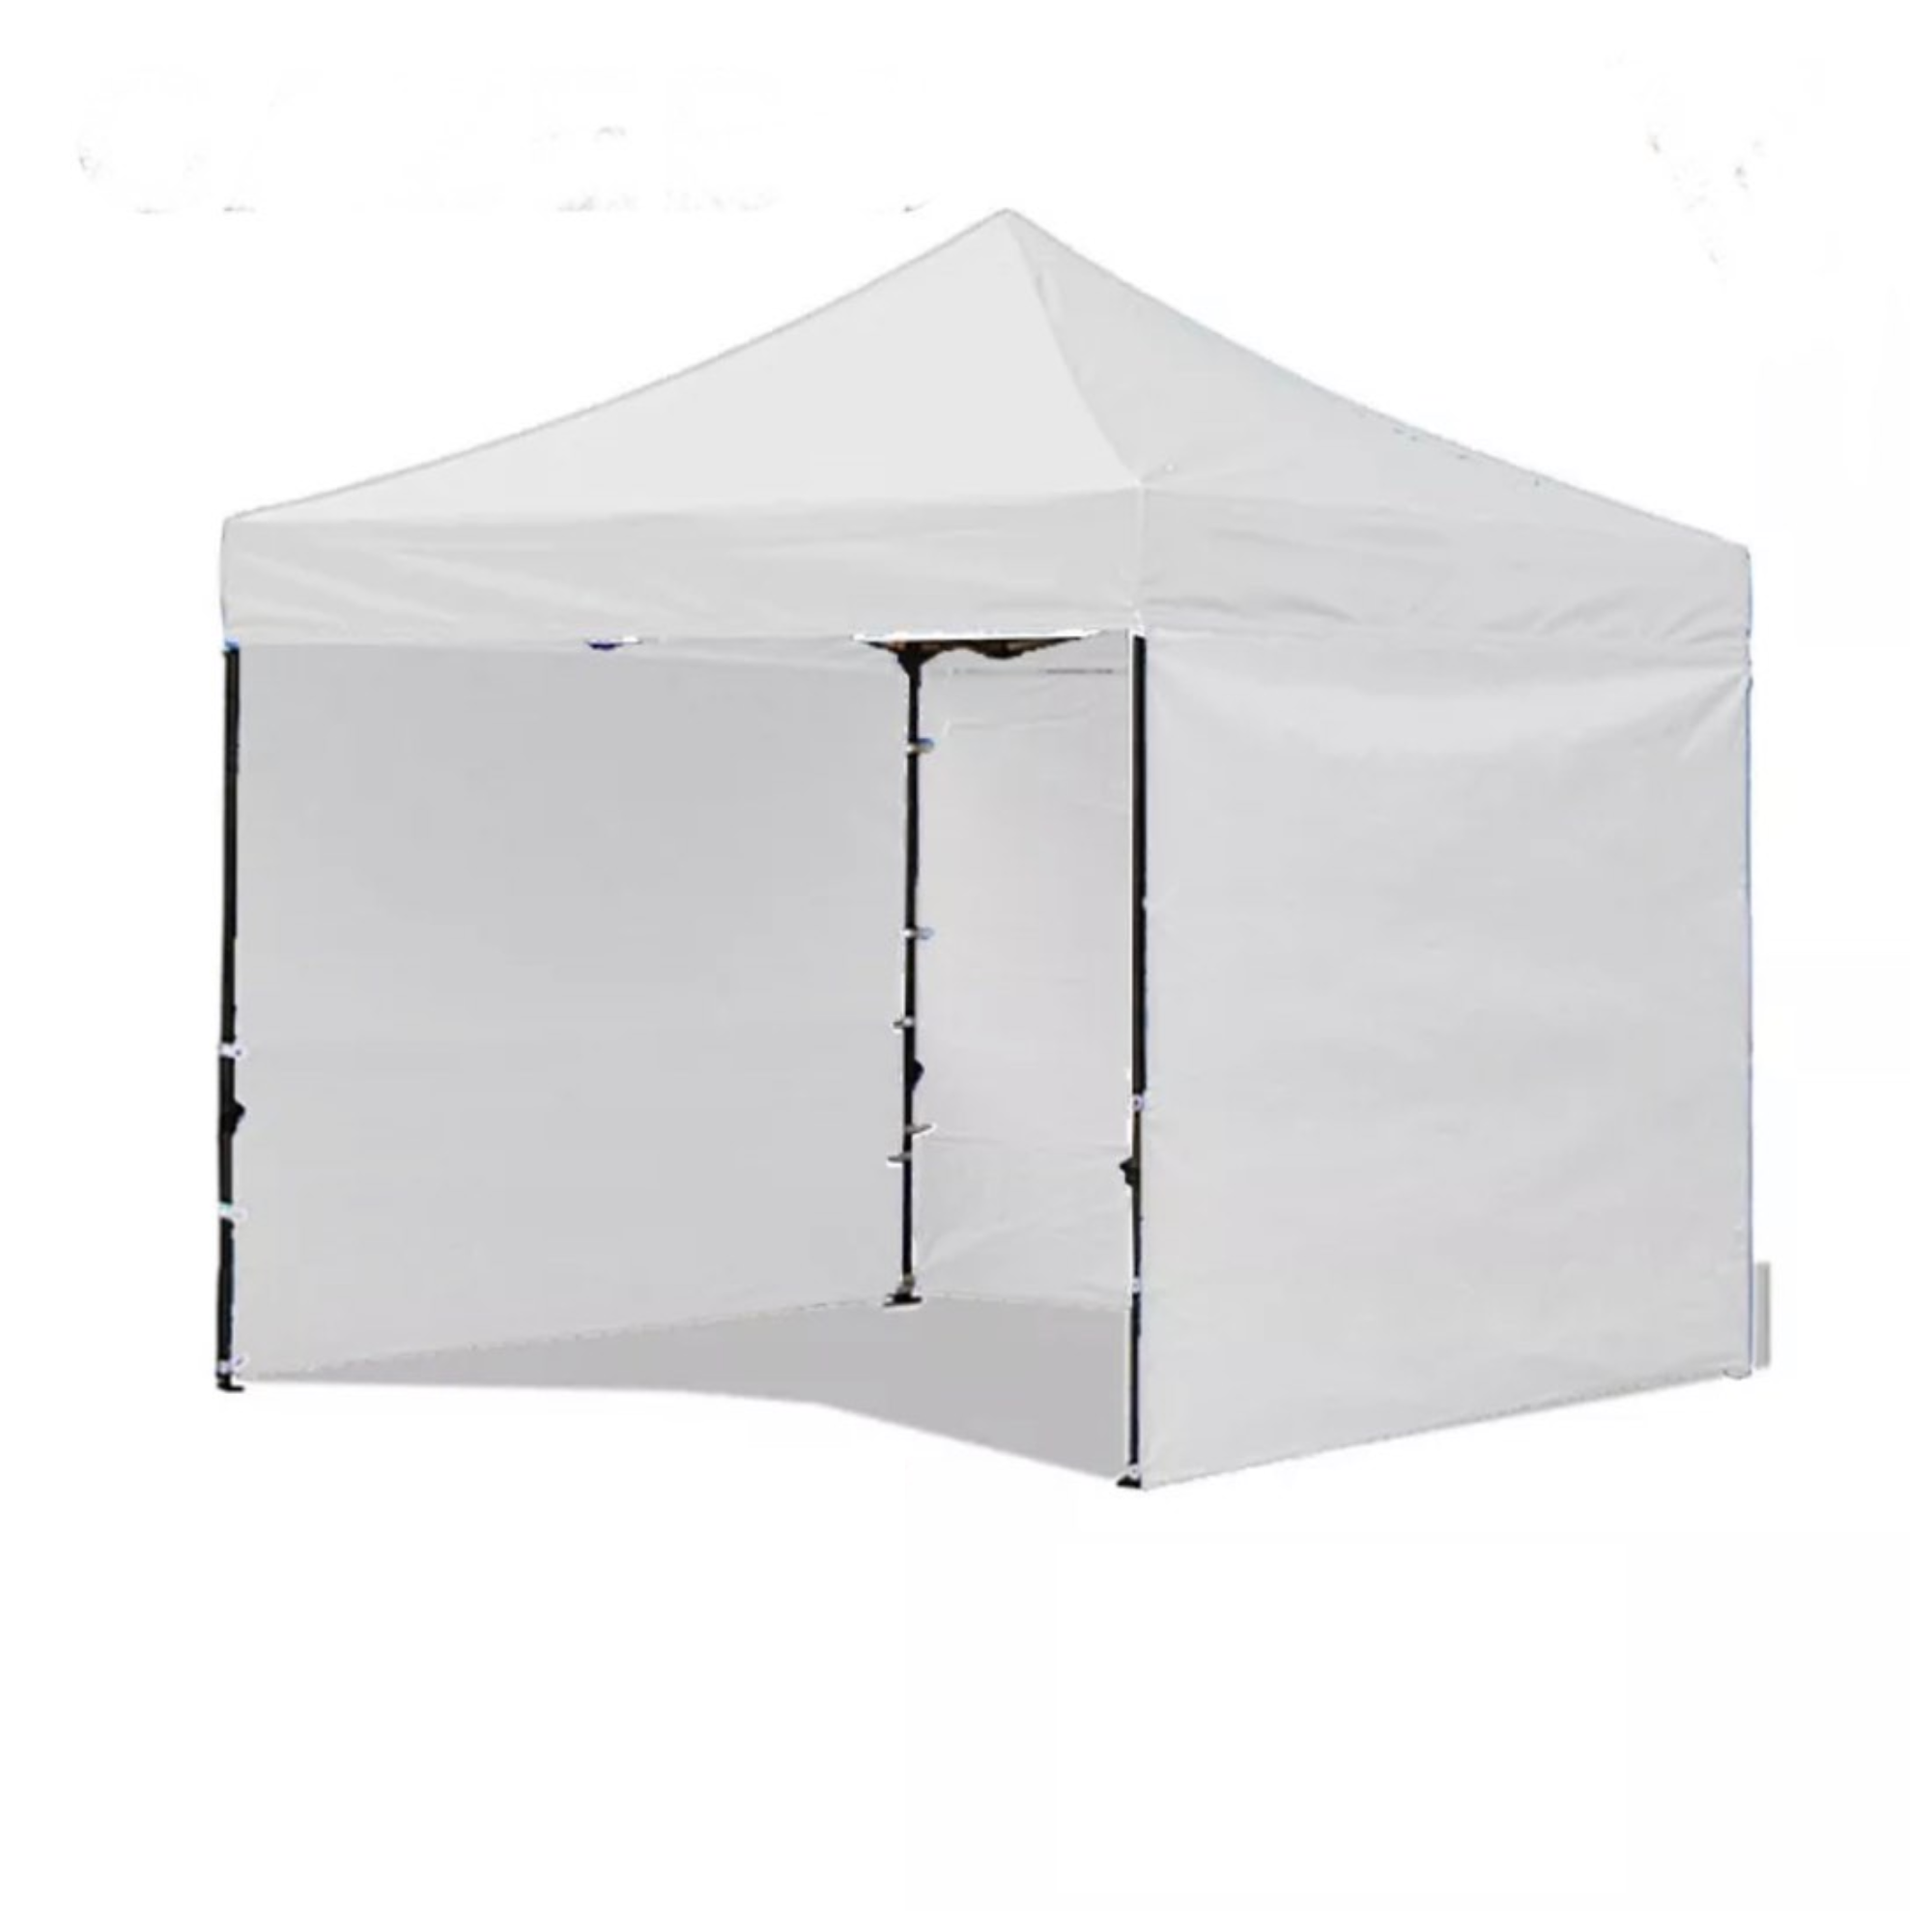 2M X 2M Folding TENTAGE CANVAS White With 4-SIDED Curtain